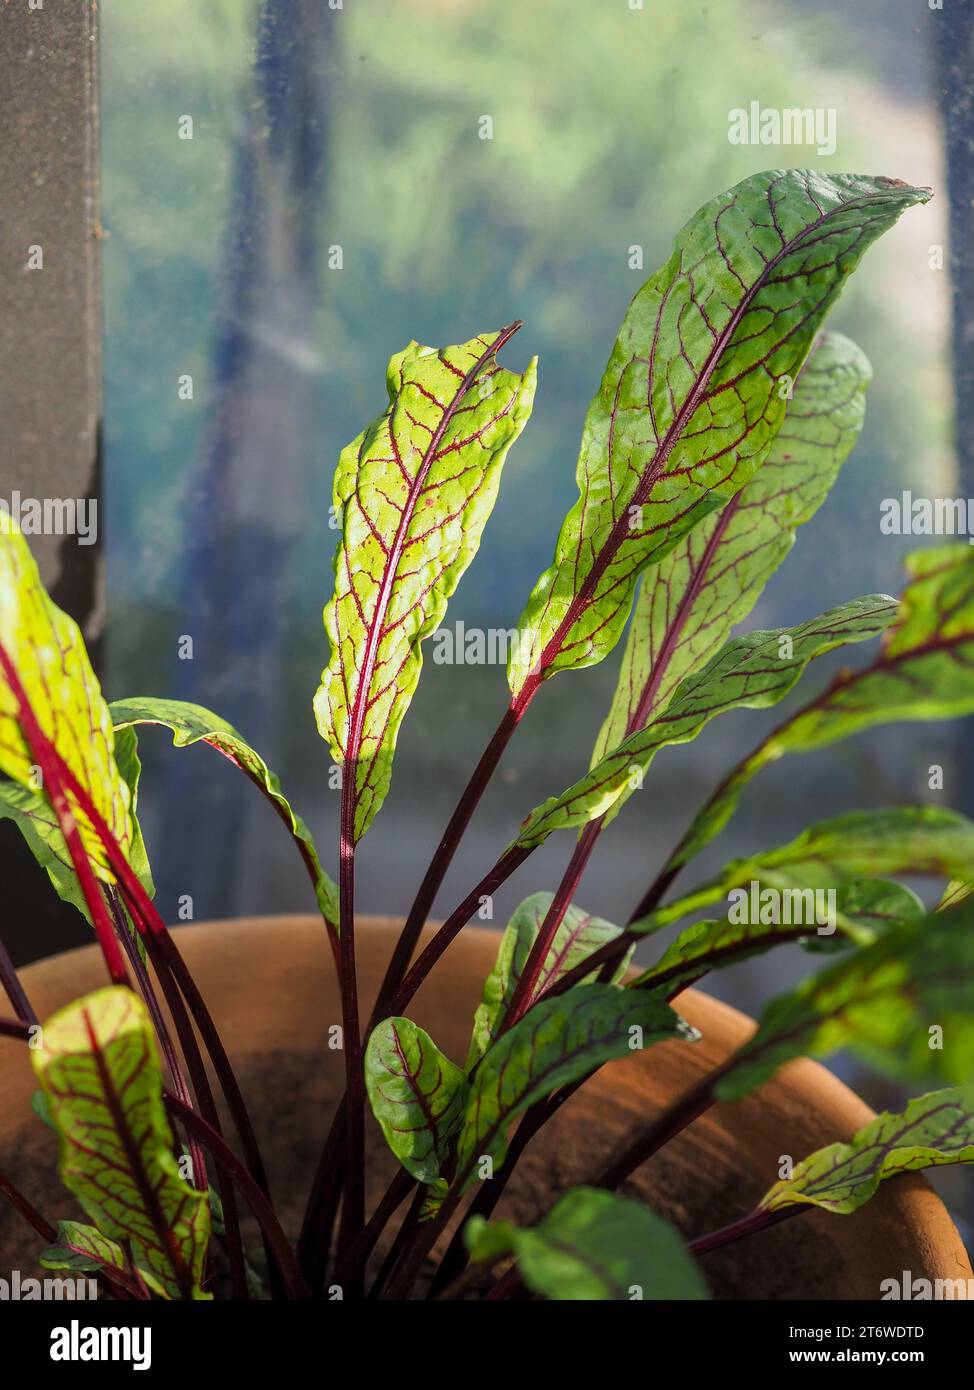 Rumex sanguineus (Red-veined sorrel) leaves shining in winter sunlight in a greenhouse in December in the UK Stock Photo